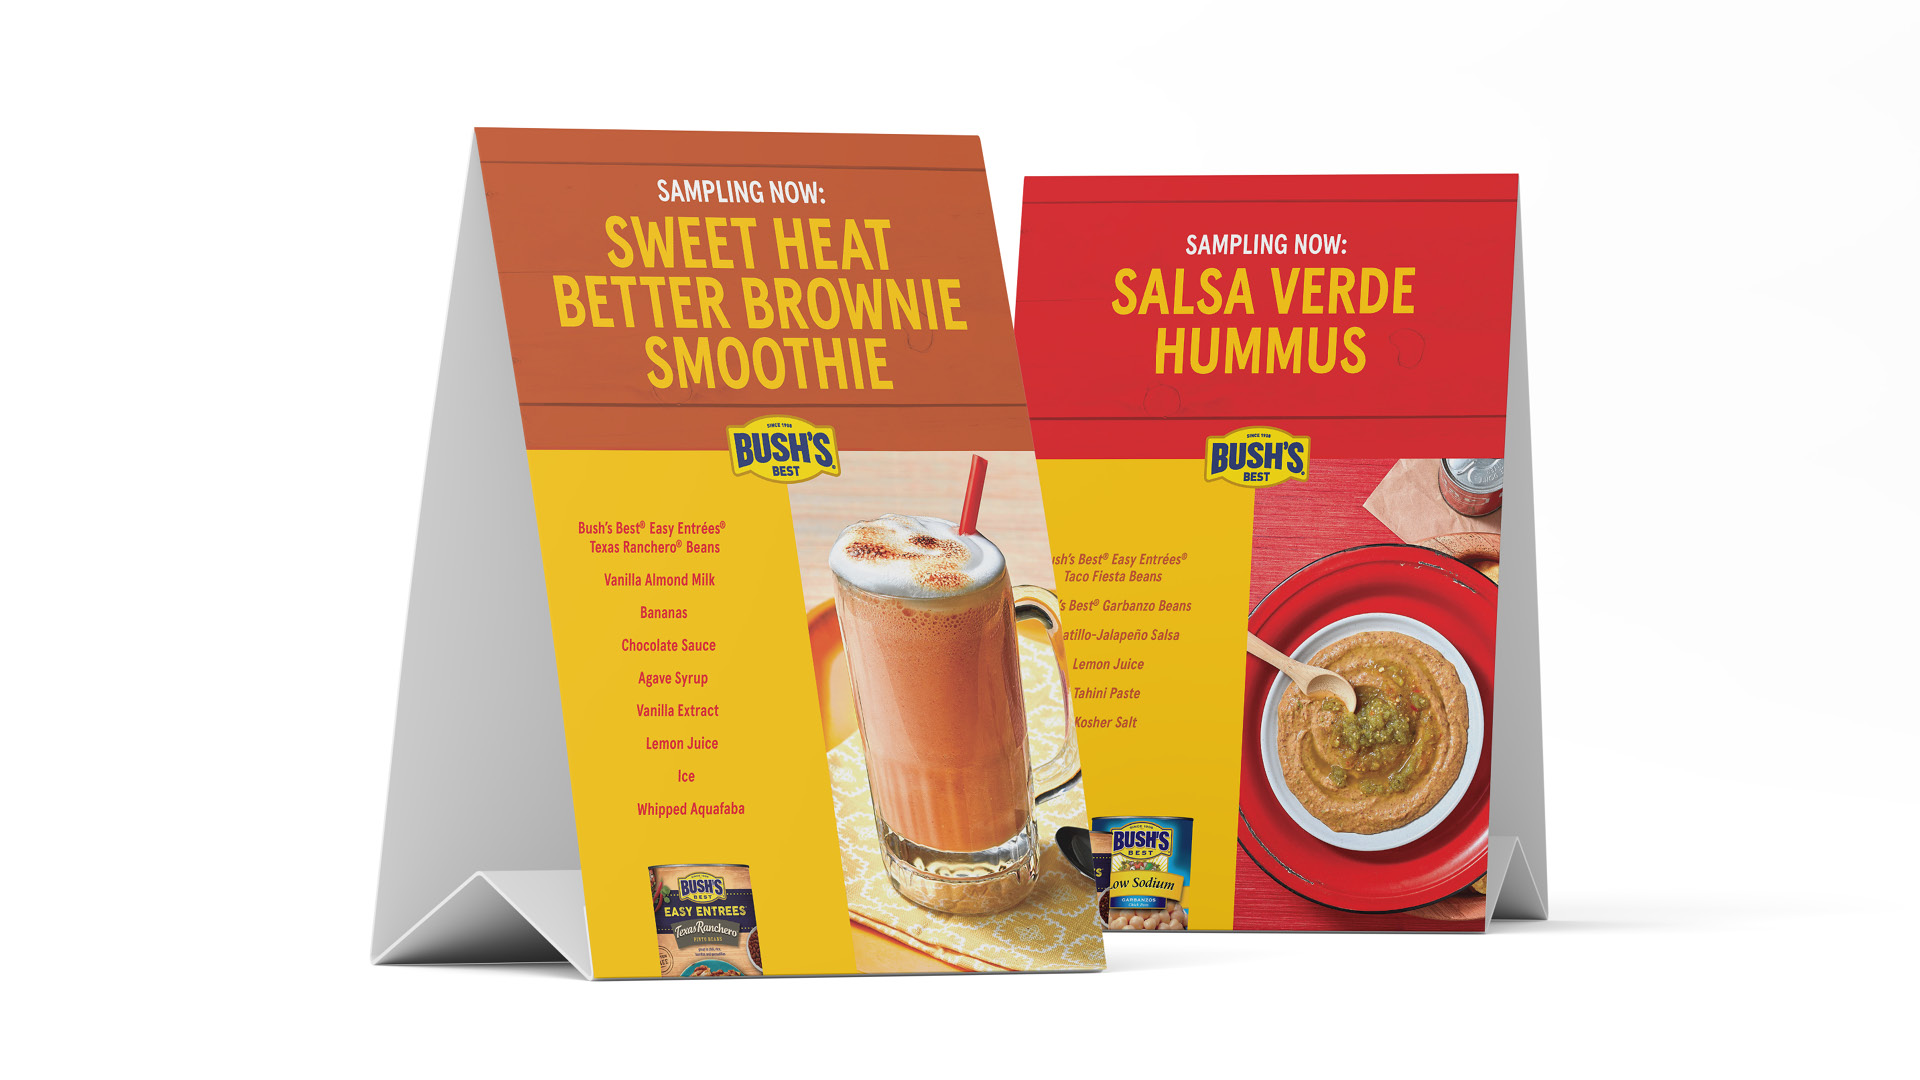 Two table tents that feature Sweet Head Better Brownie Smoothie, and Salsa Verde Hummus.